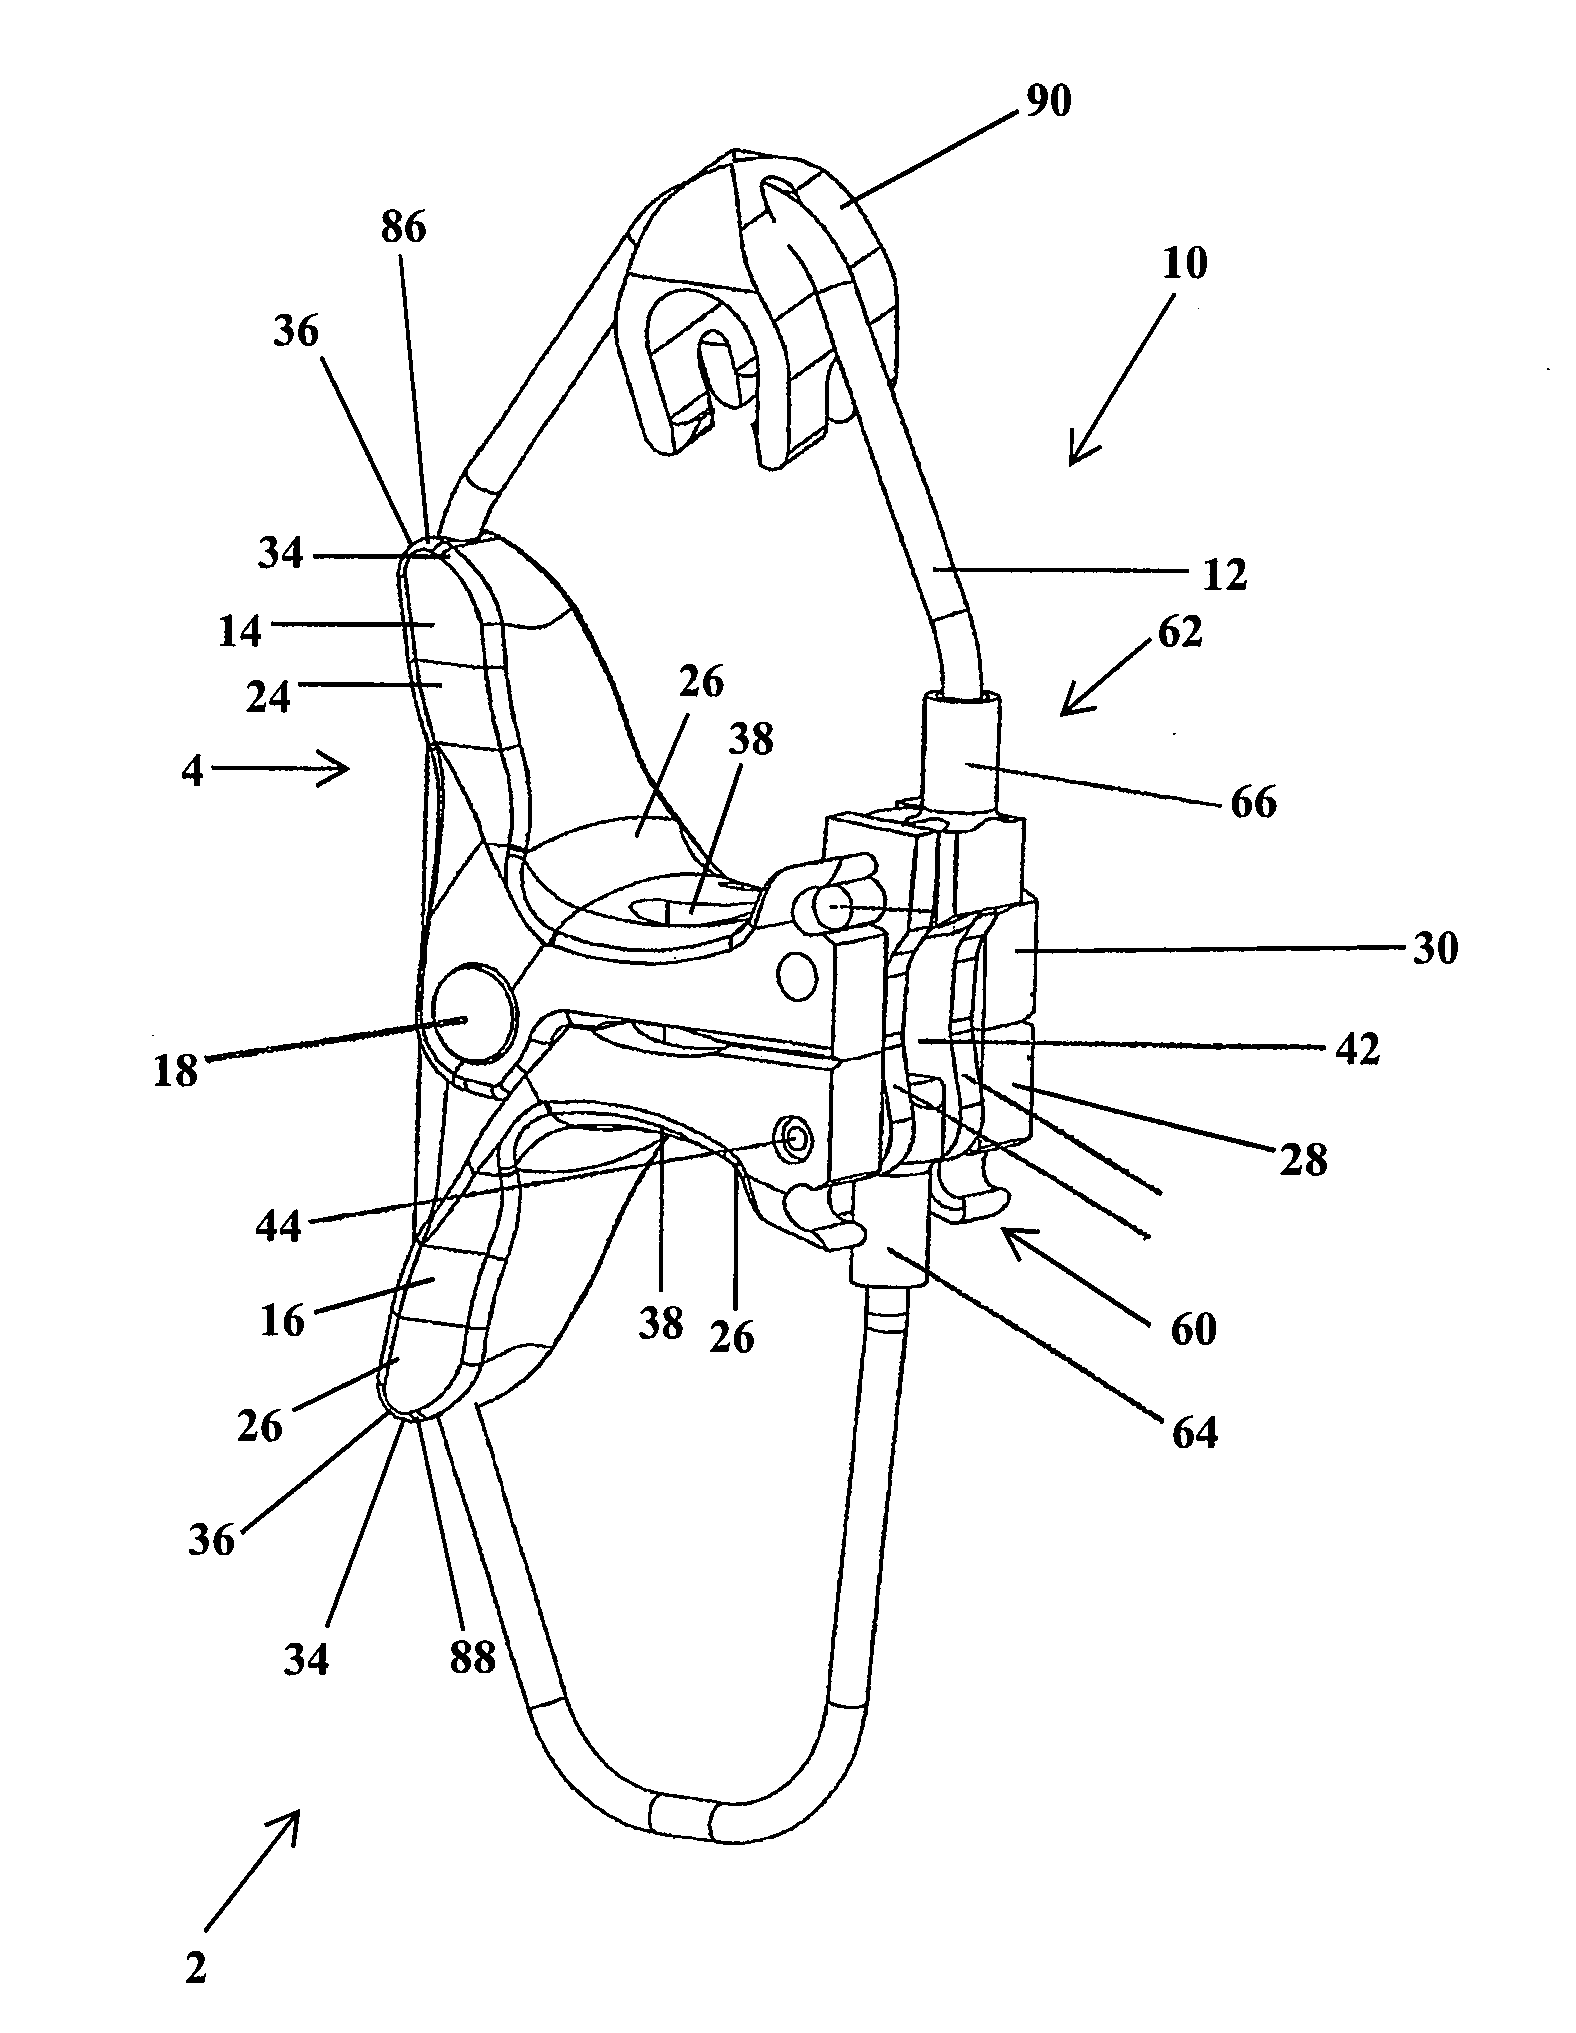 Intervertebral Implant Devices and Methods for Insertion Thereof